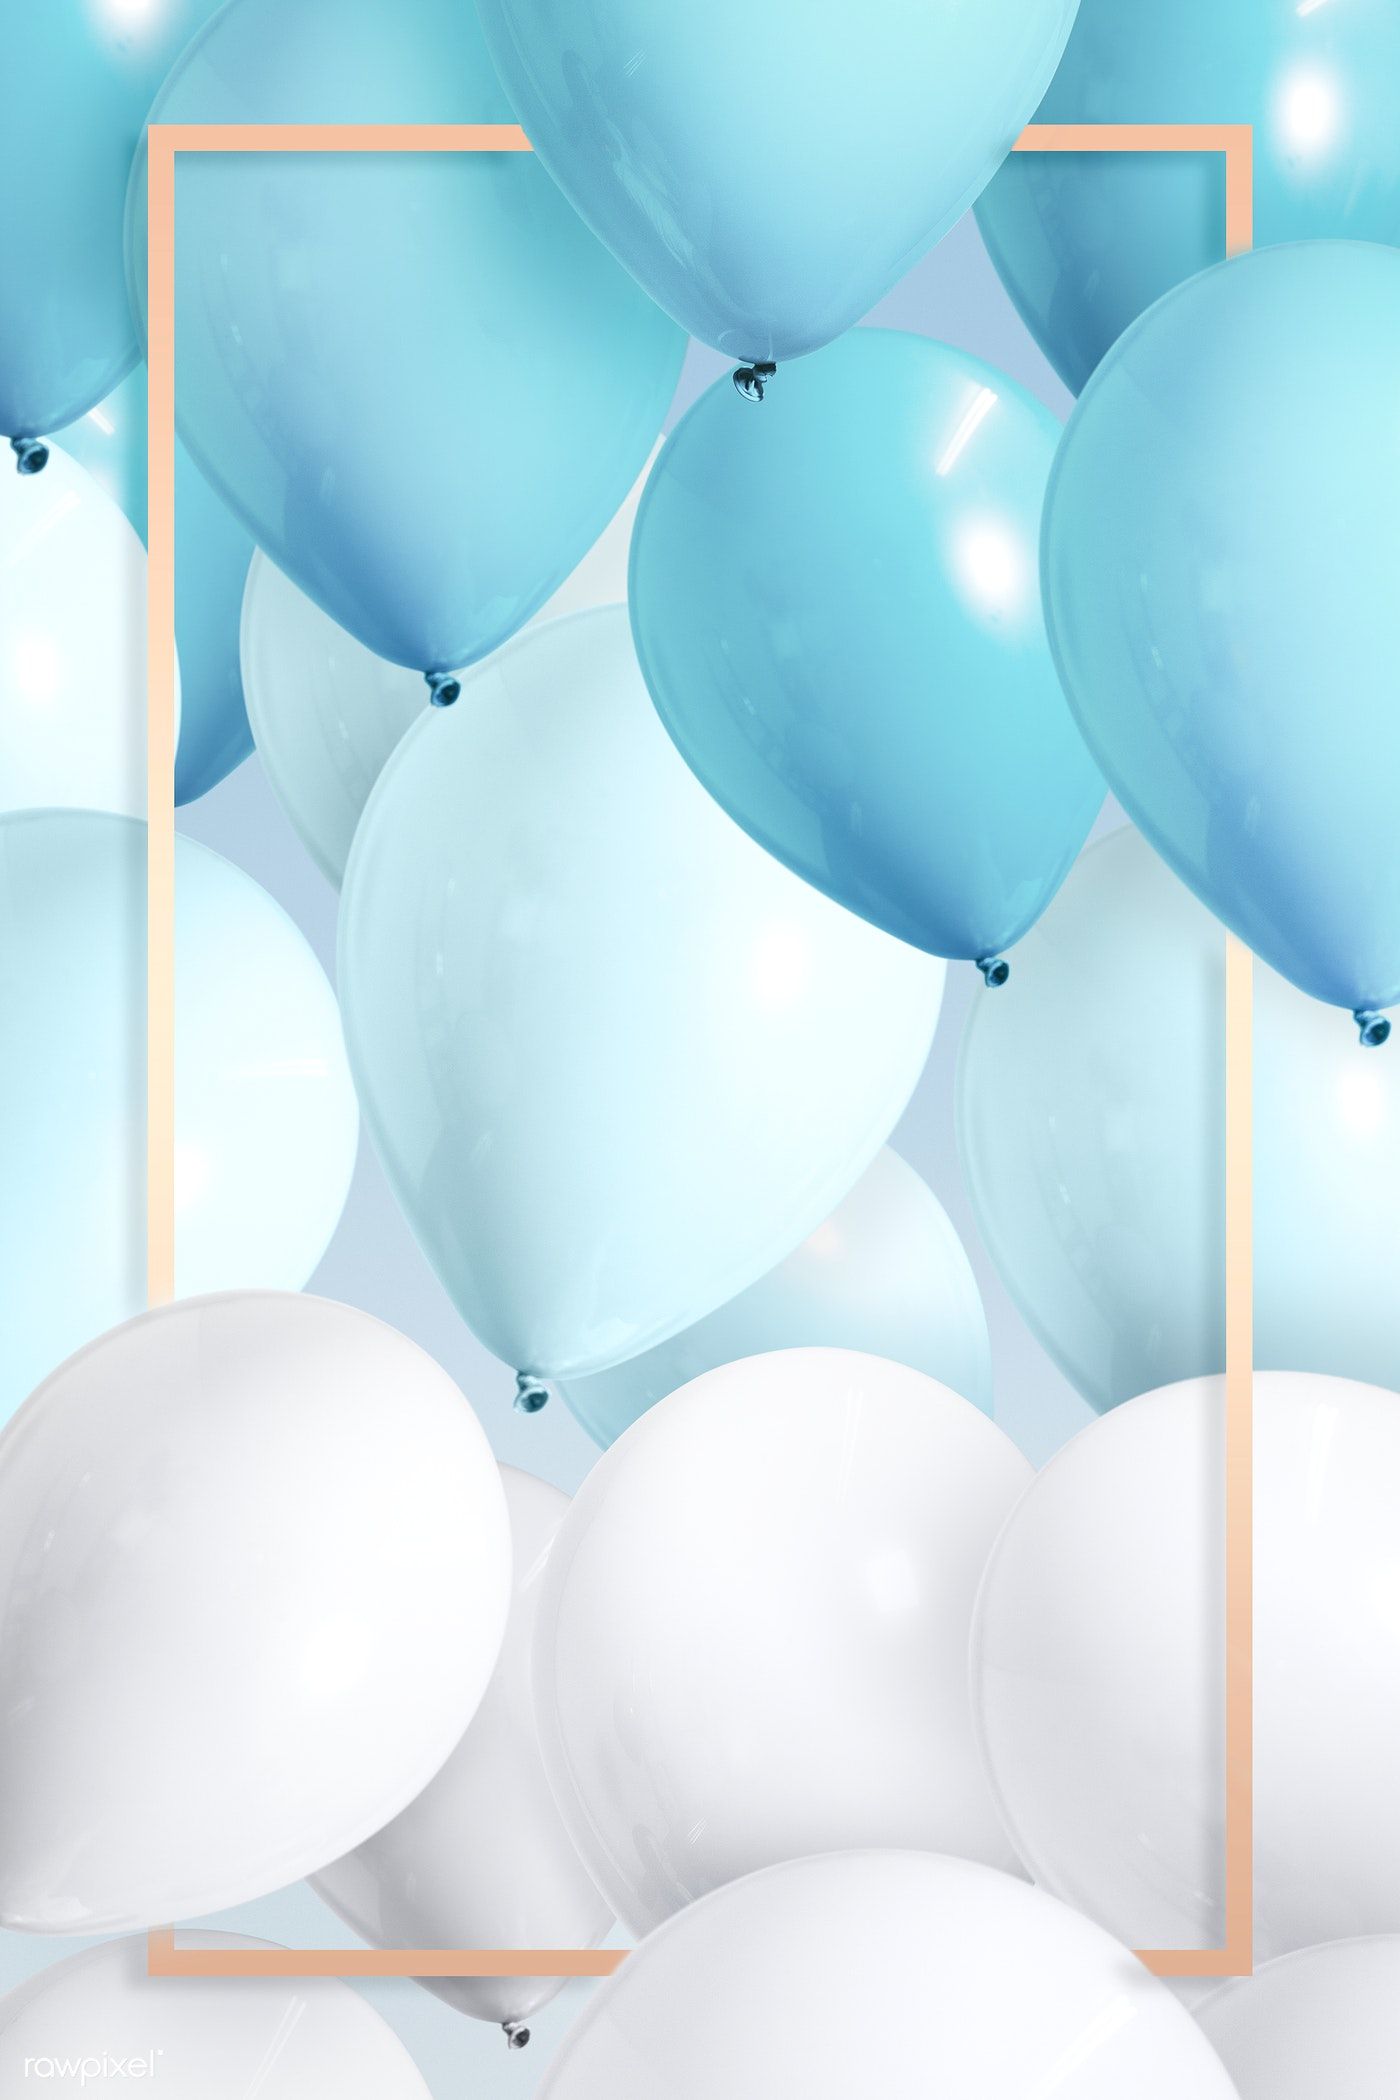 A blue and white balloons with an orange frame - Birthday